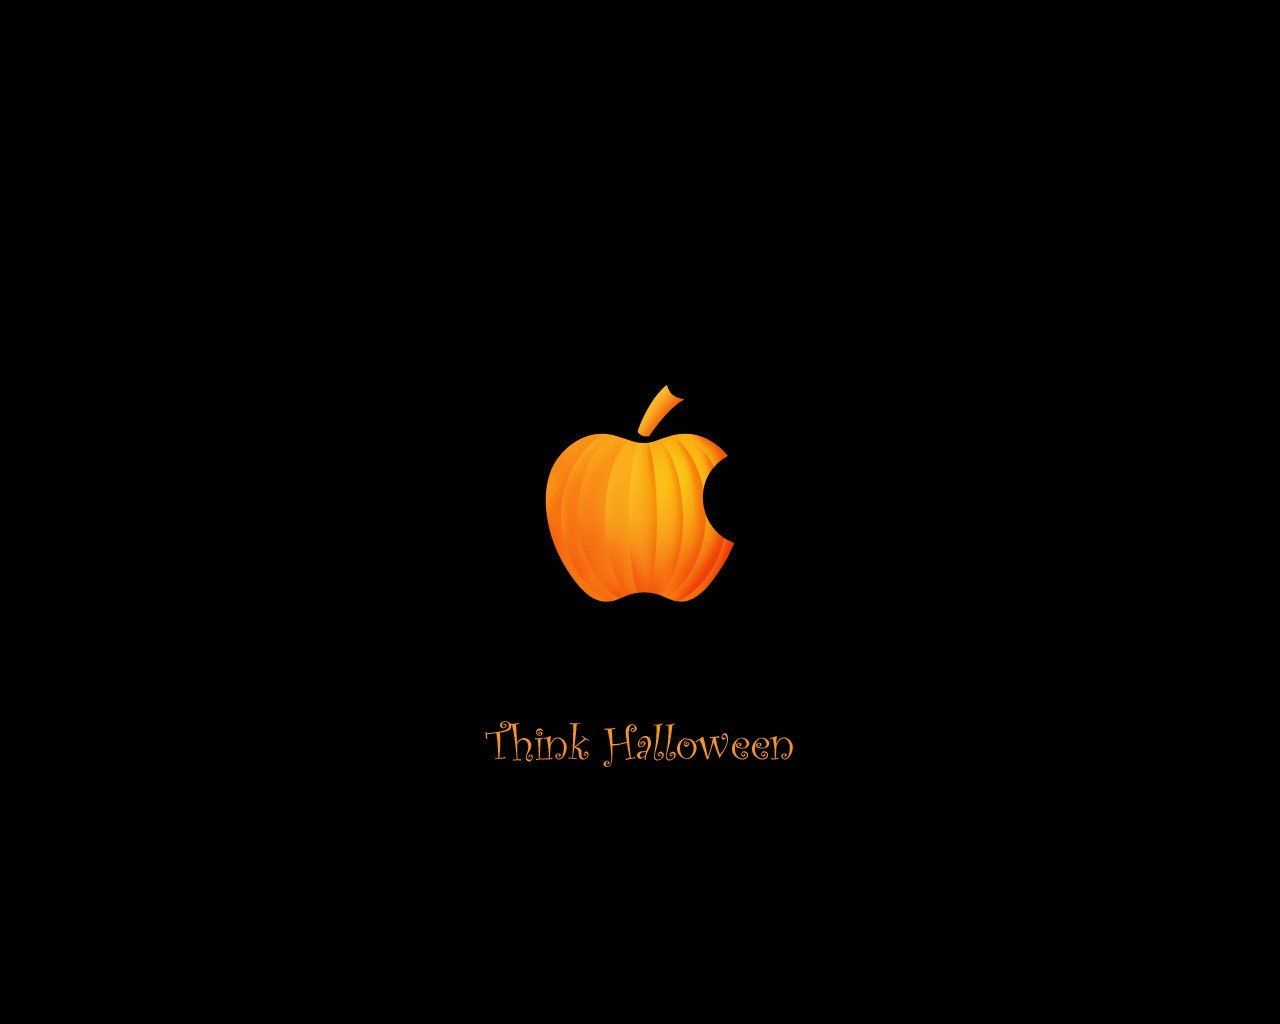 Best Halloween wallpapers for iPhone and iPad 2021